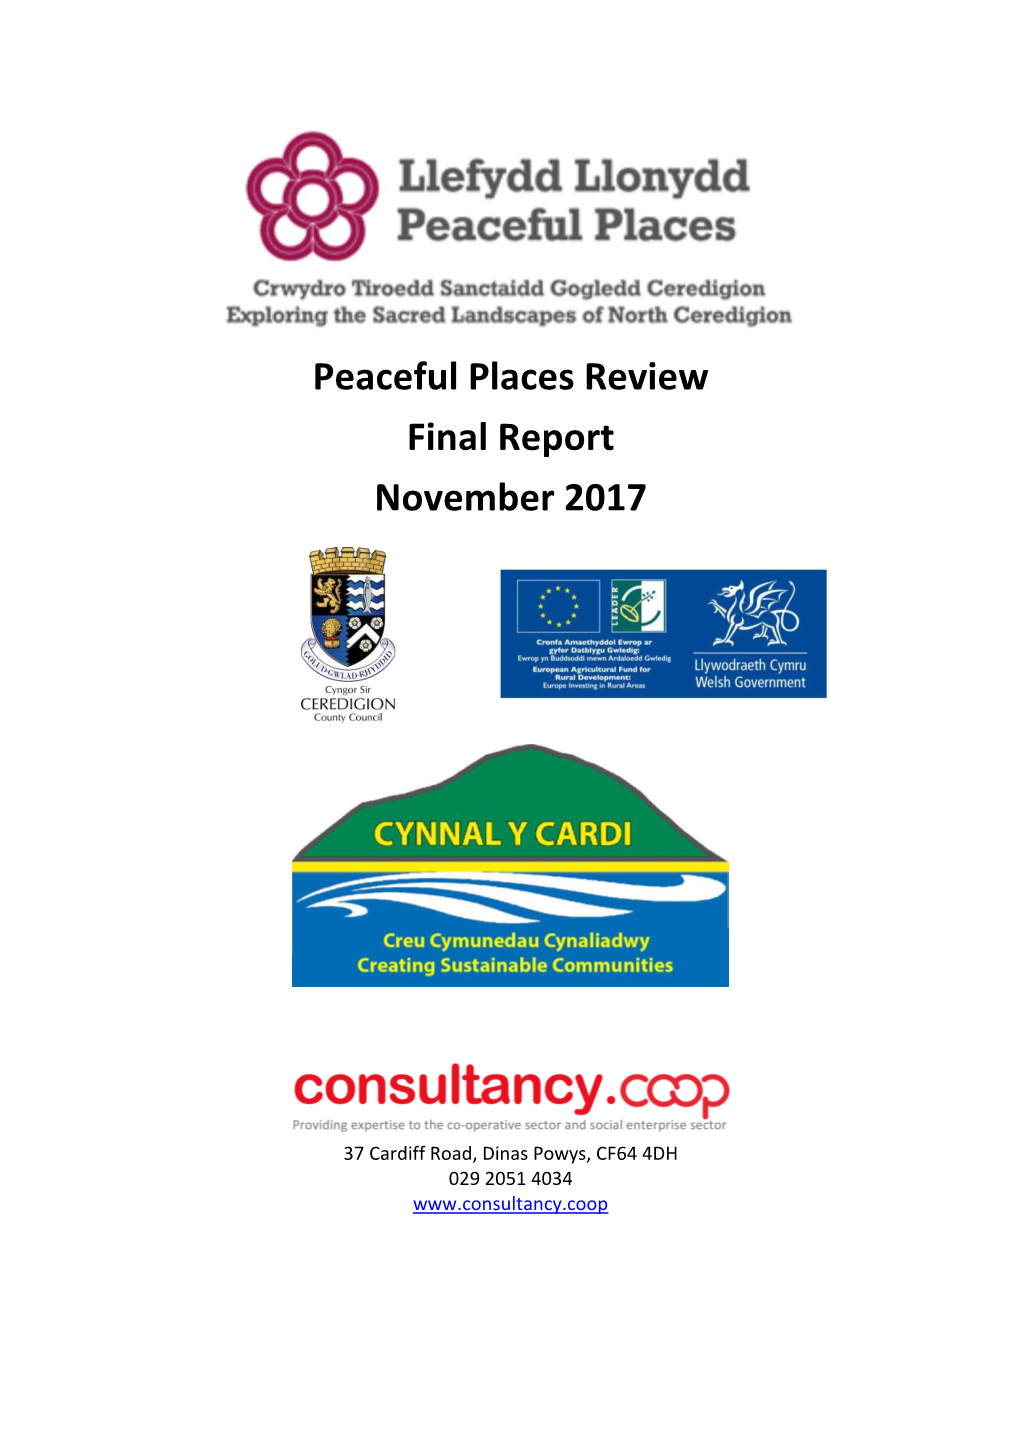 Peaceful Places Review Final Report November 2017